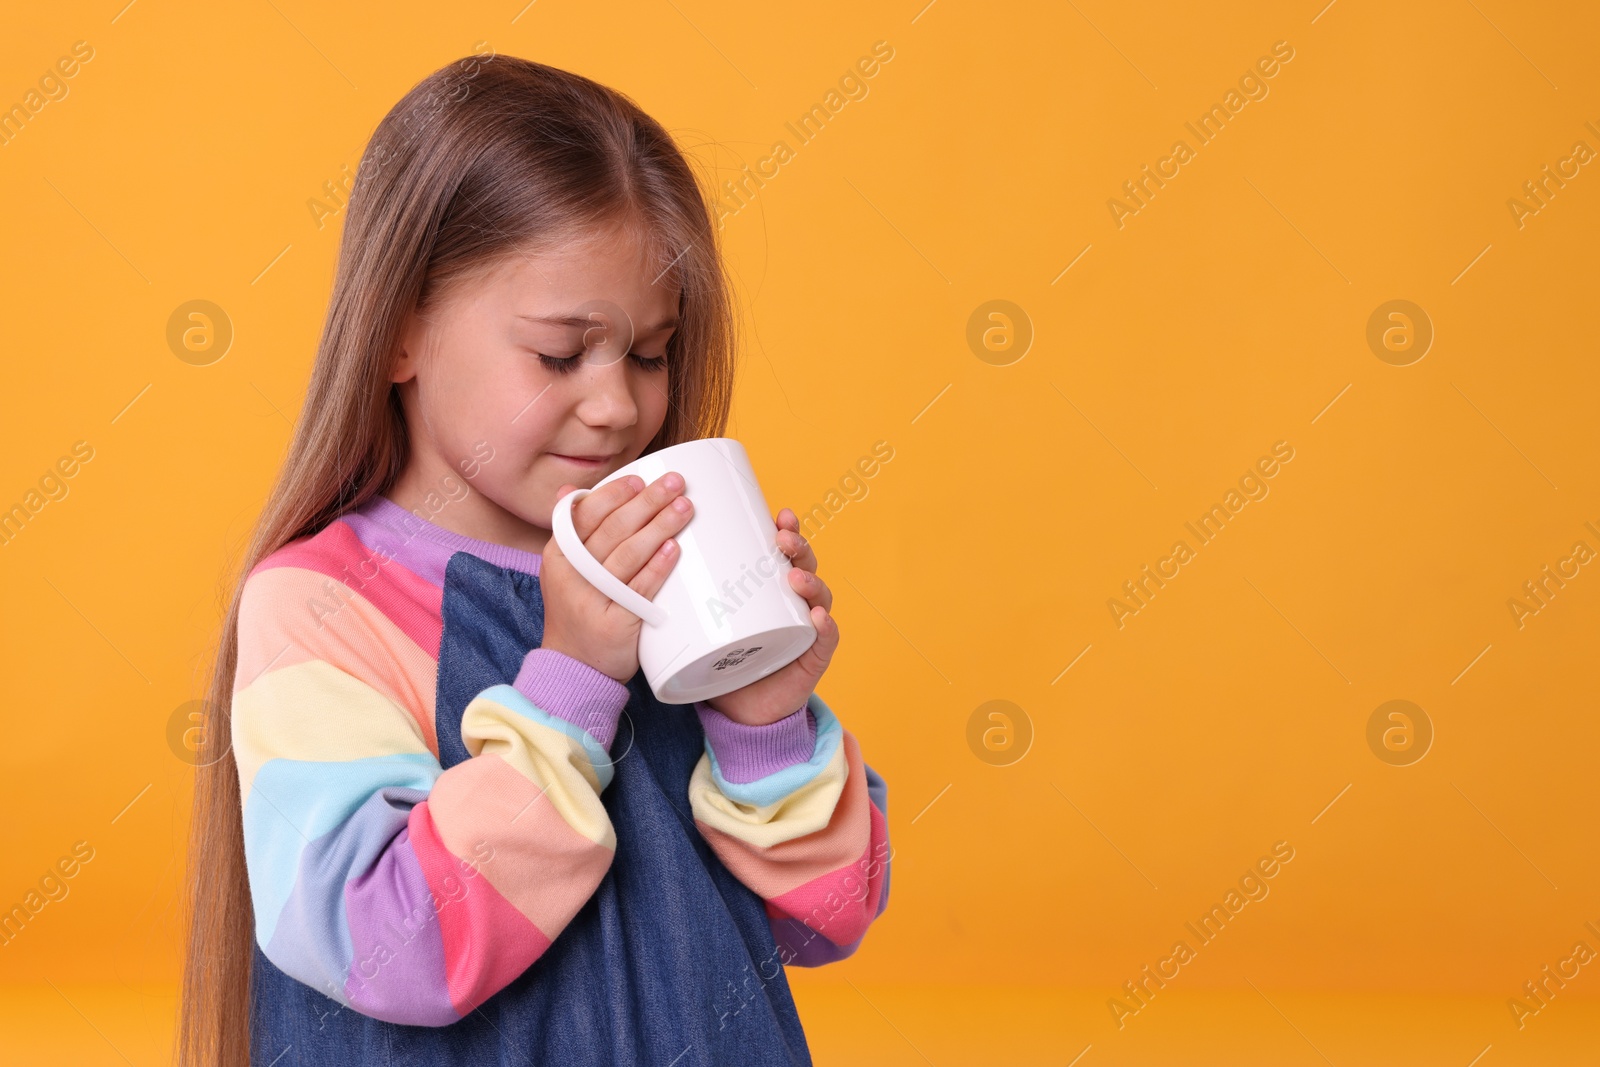 Photo of Cute girl drinking beverage from white ceramic mug on orange background, space for text